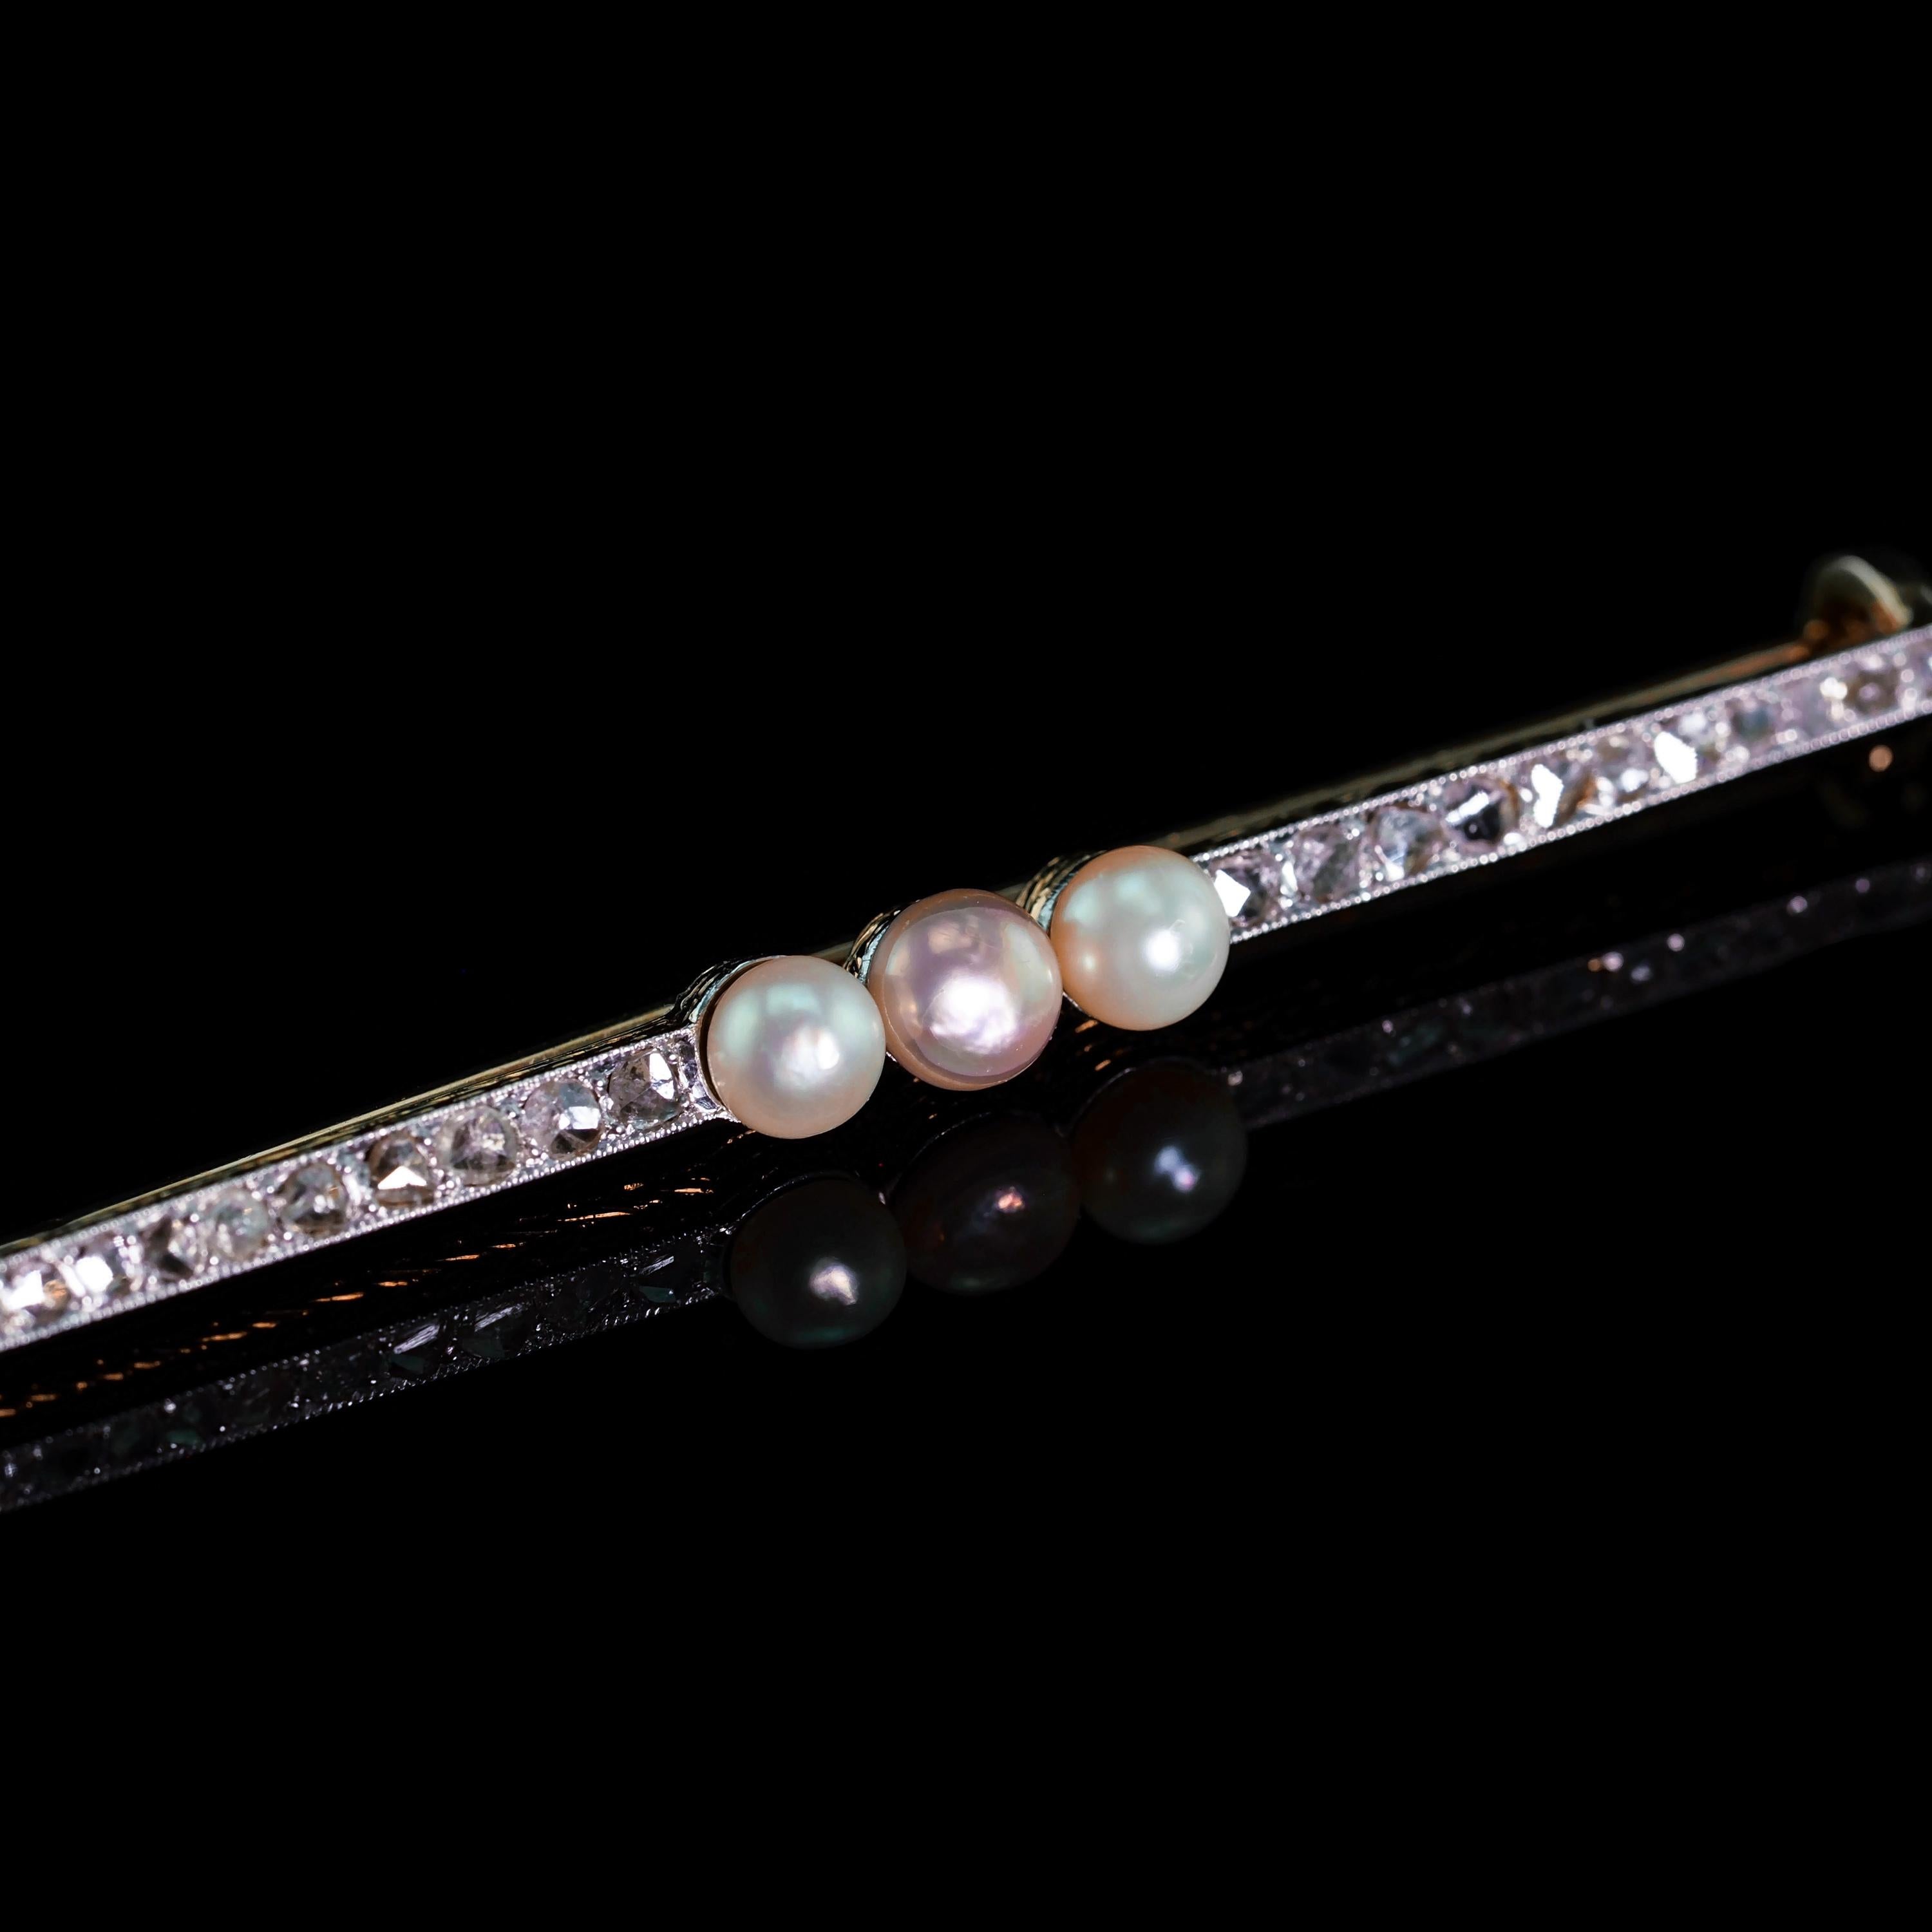 Antique 18ct Gold & Platinum Pink Pearl & Diamond Brooch - c.1920 For Sale 2